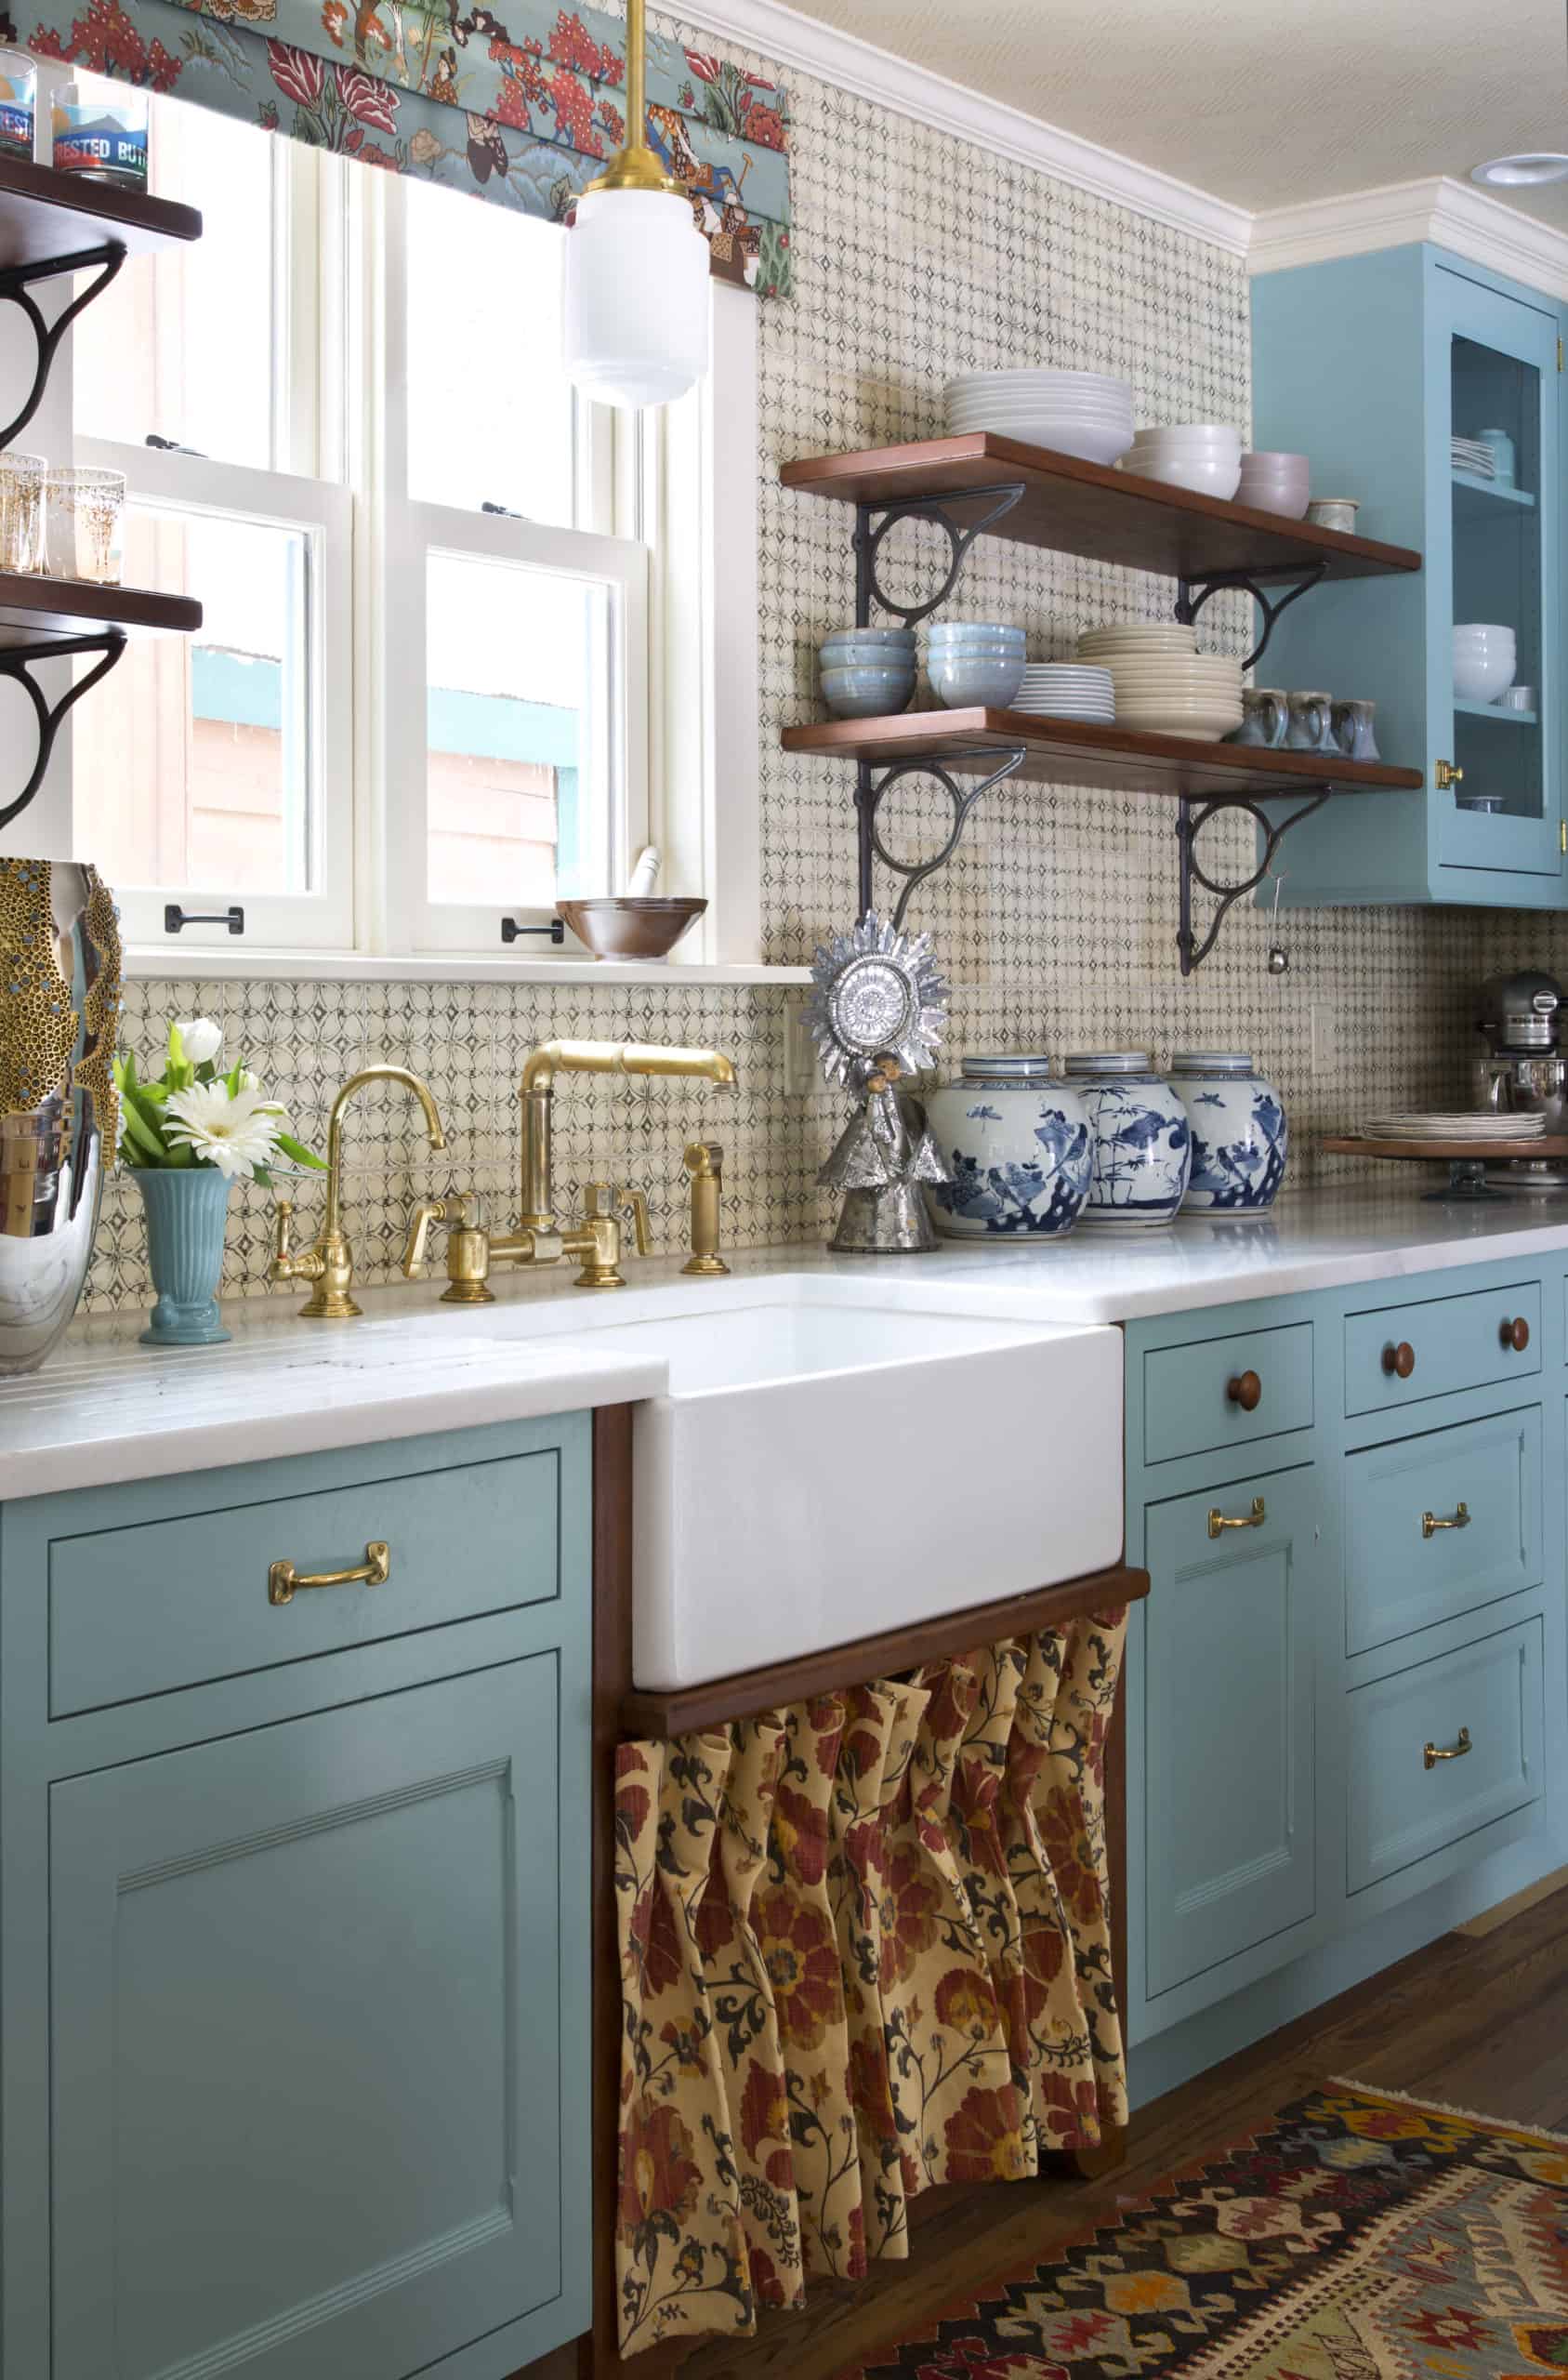 Farmhouse sink in country kitchen with turquoise cabinets